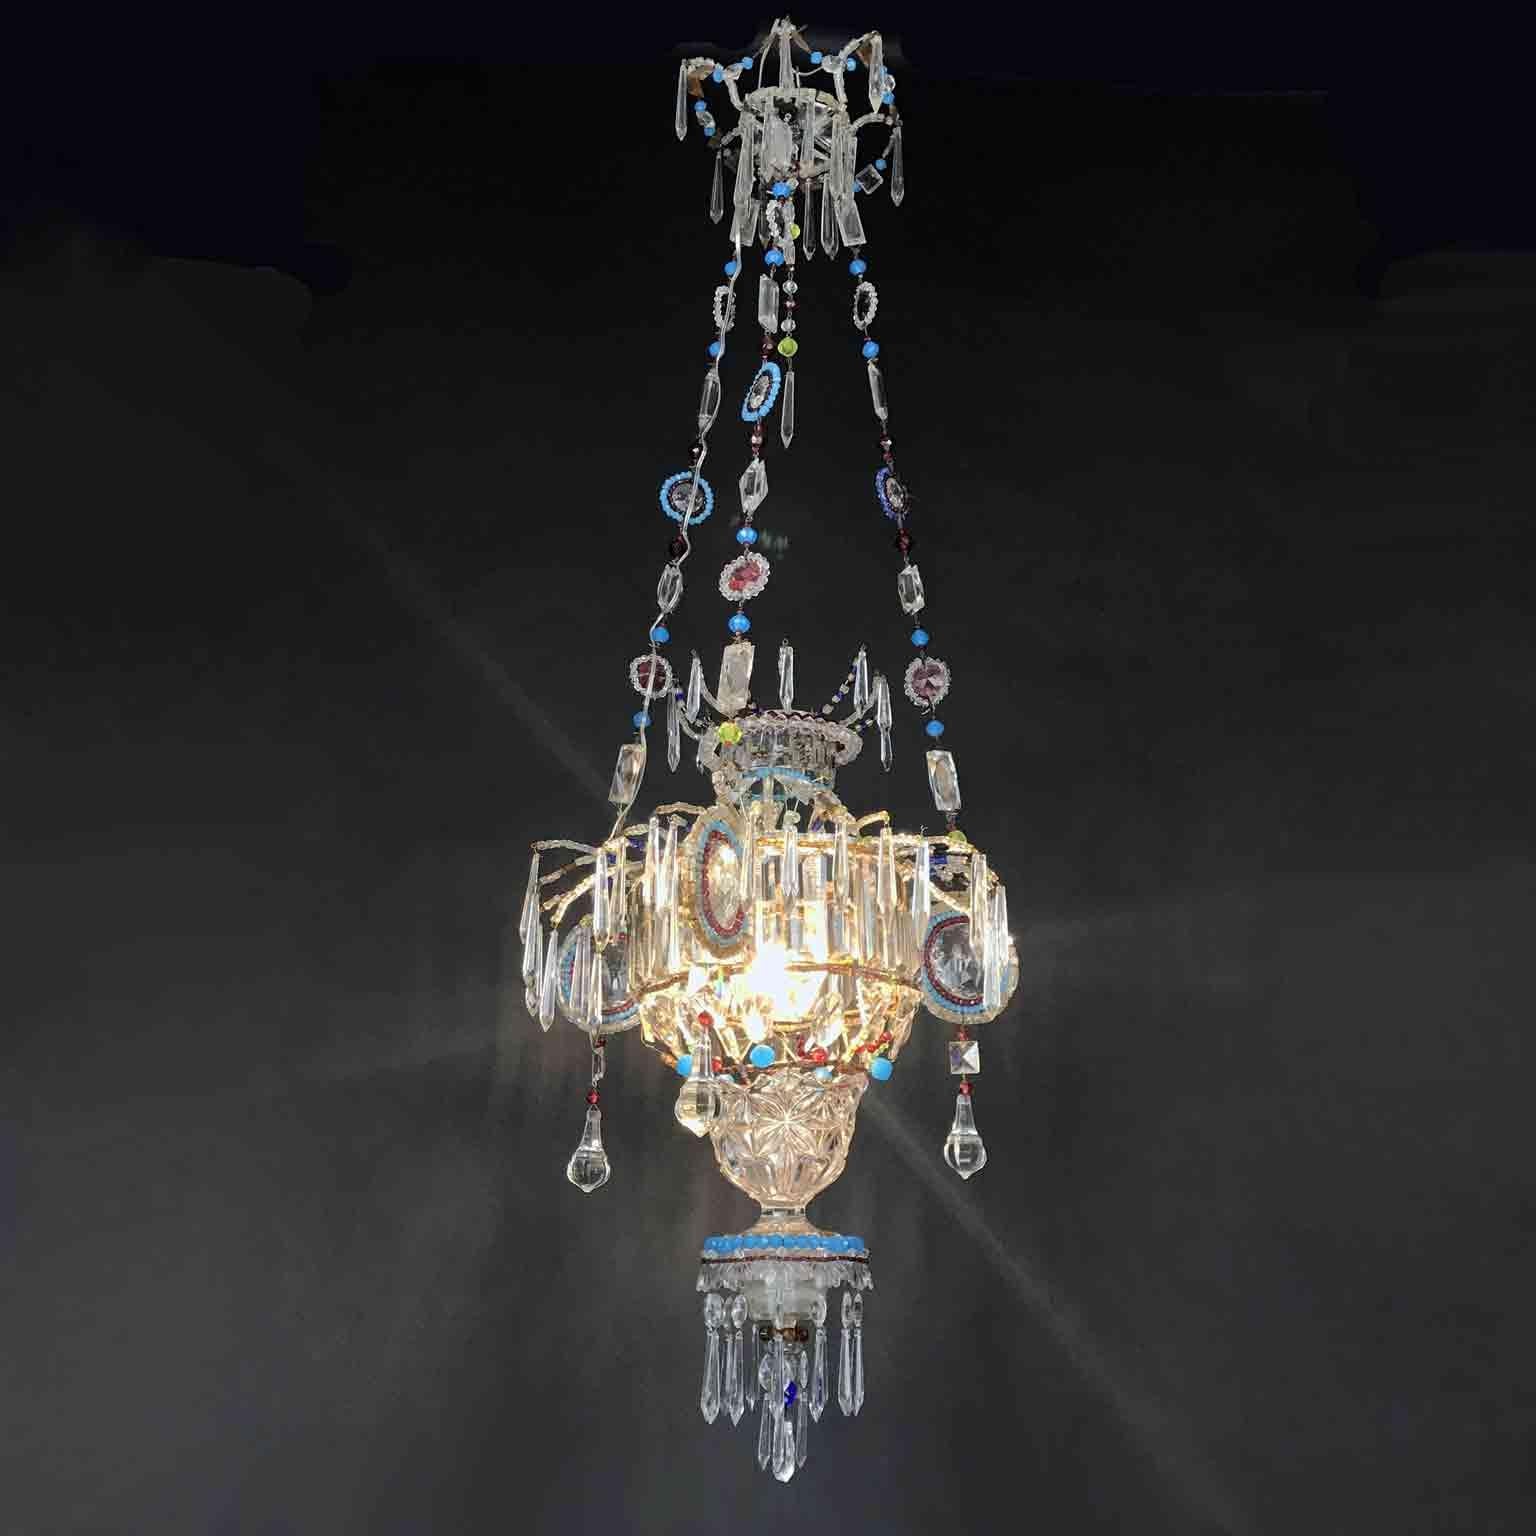 A charming hall lantern from Italy, a one of a kind beaded crystal and clear crystal one-light chandelier, decorated with ruby red and turquoise colored glasses and beads, coming from the entry of a private palazzo in Marche, a Central Italian